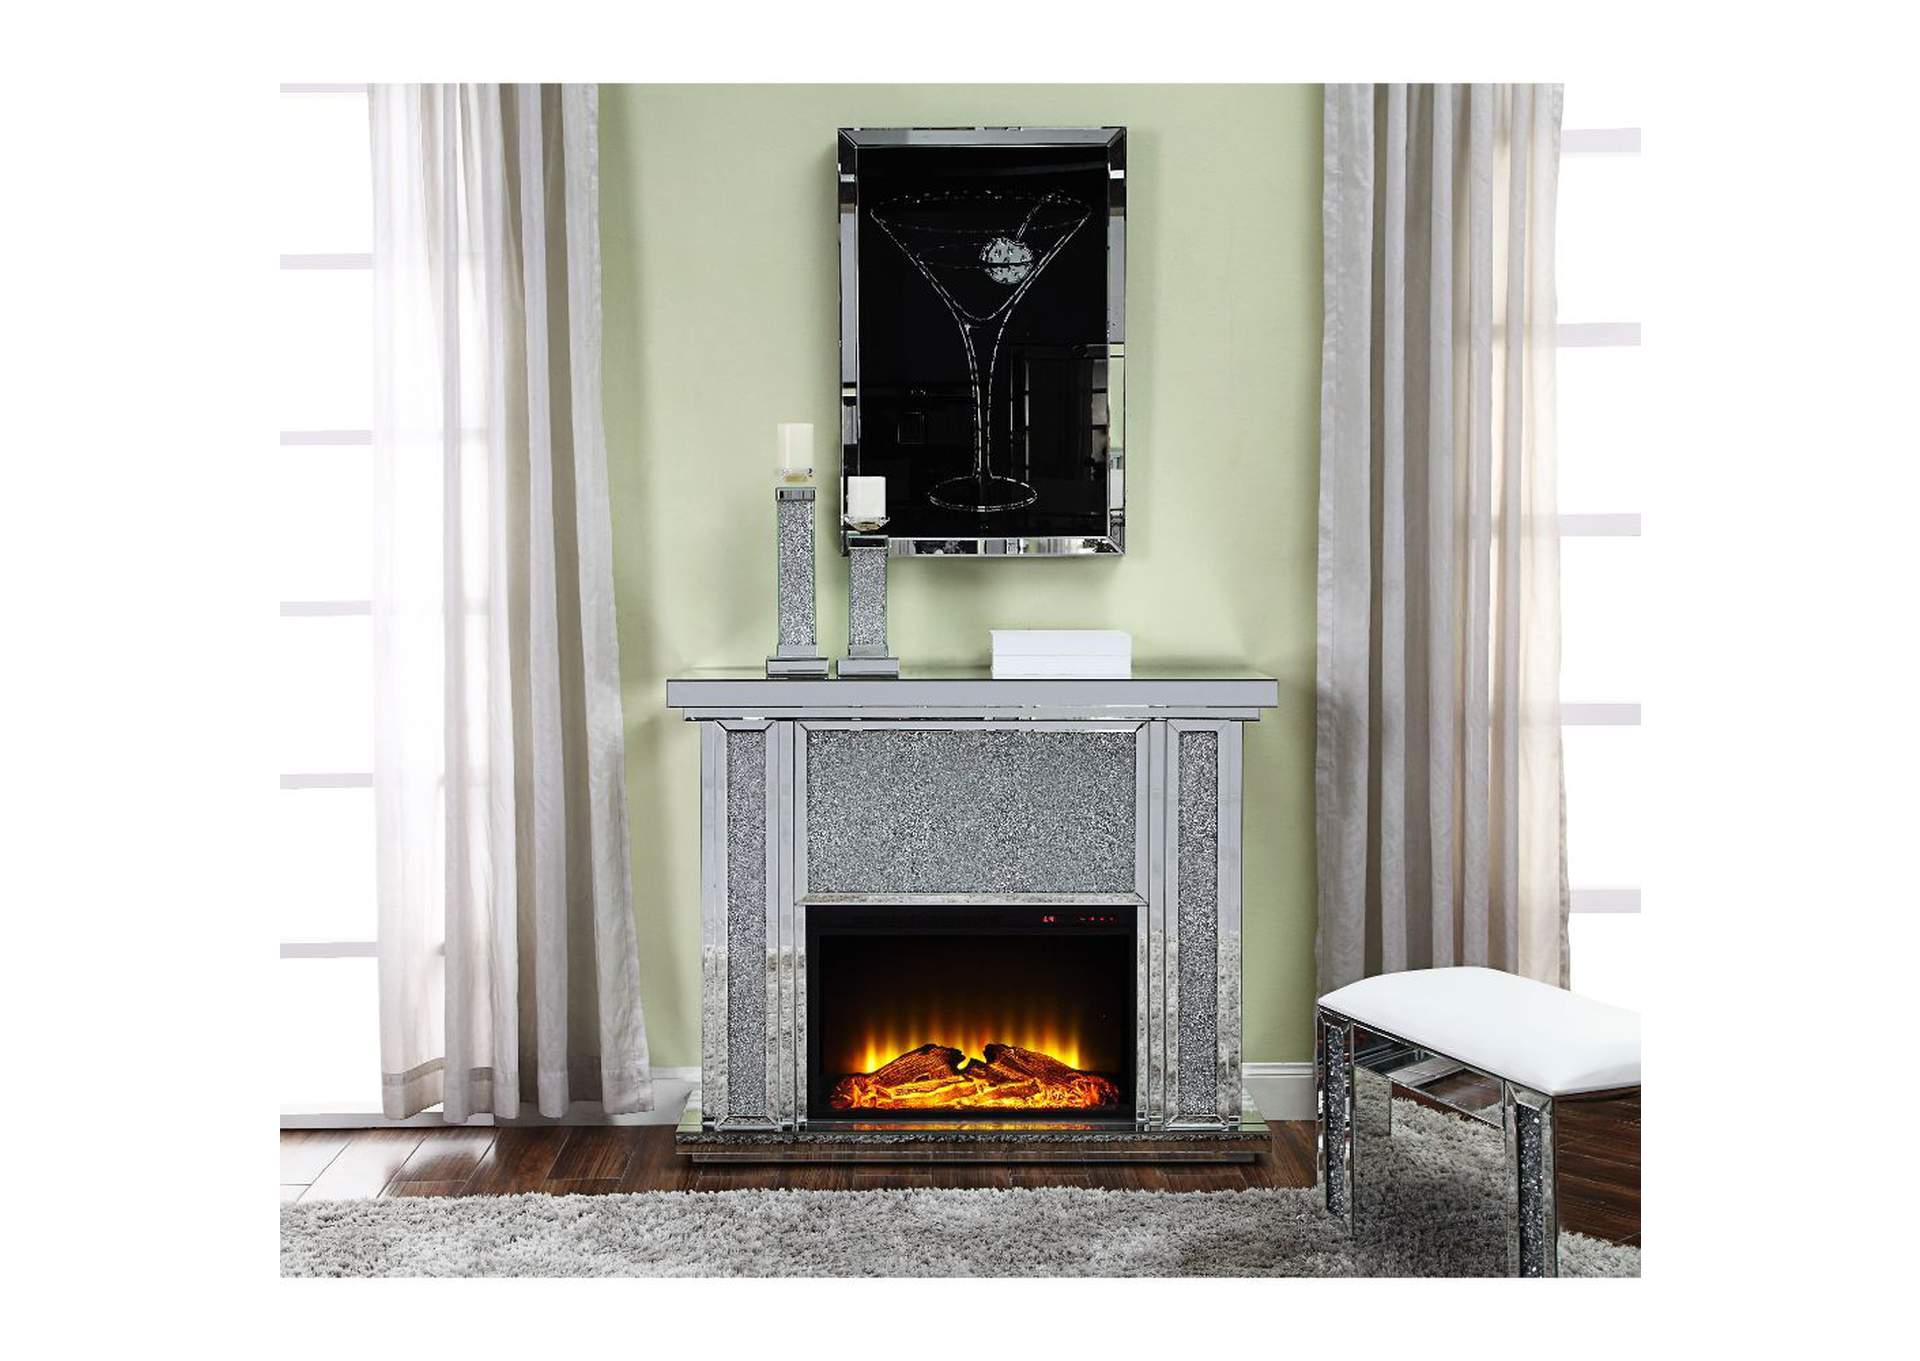 Nowles Mirrored & Faux Stones Fireplace,Acme